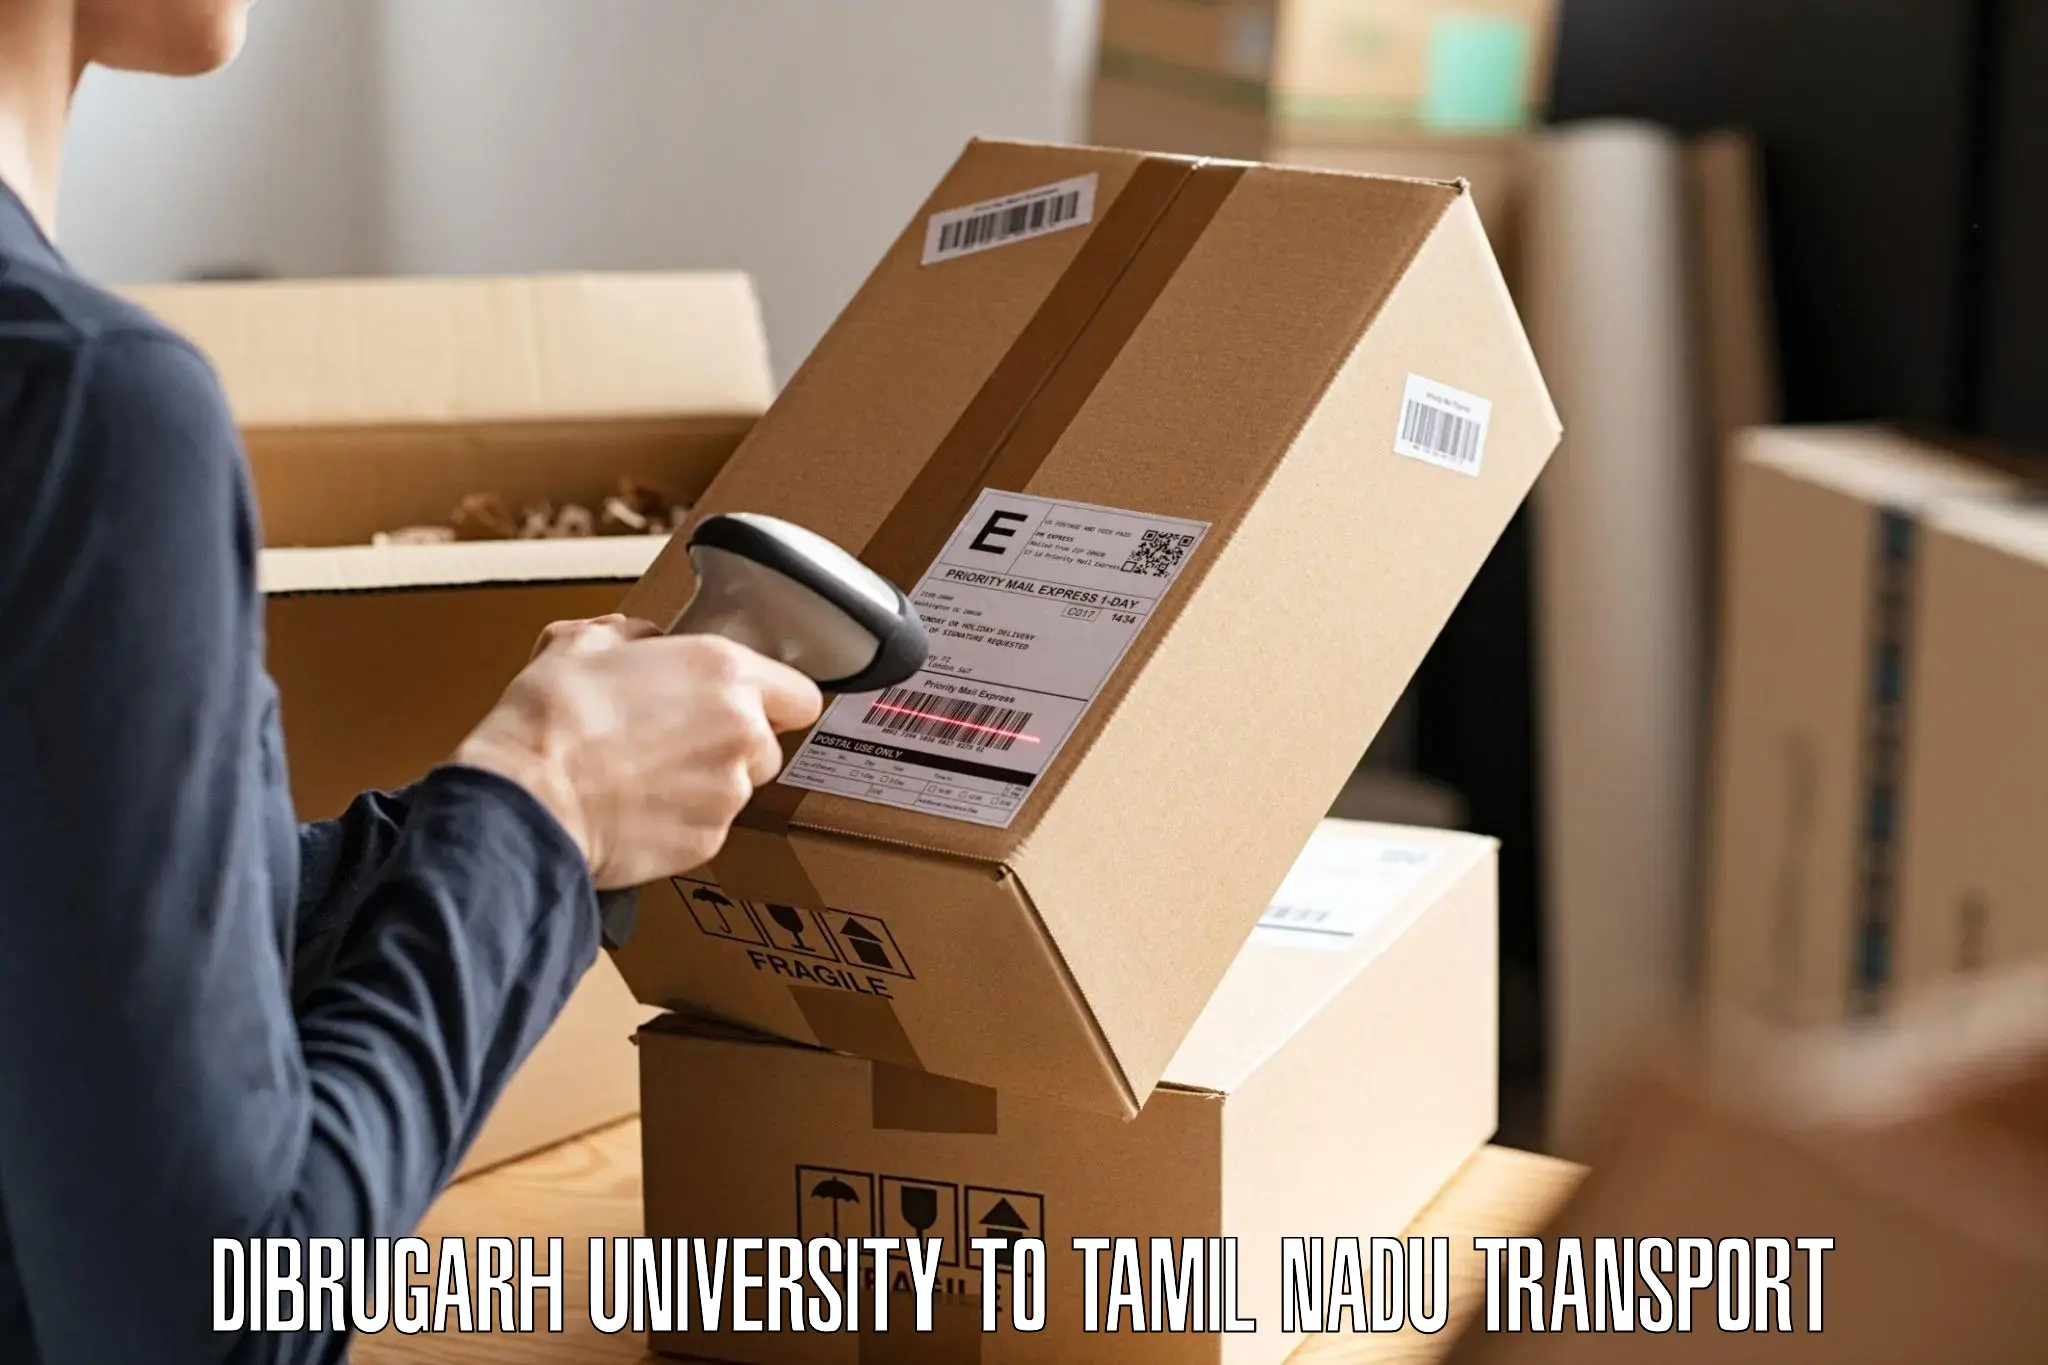 Air freight transport services Dibrugarh University to Shanmugha Arts Science Technology and Research Academy Thanjavur